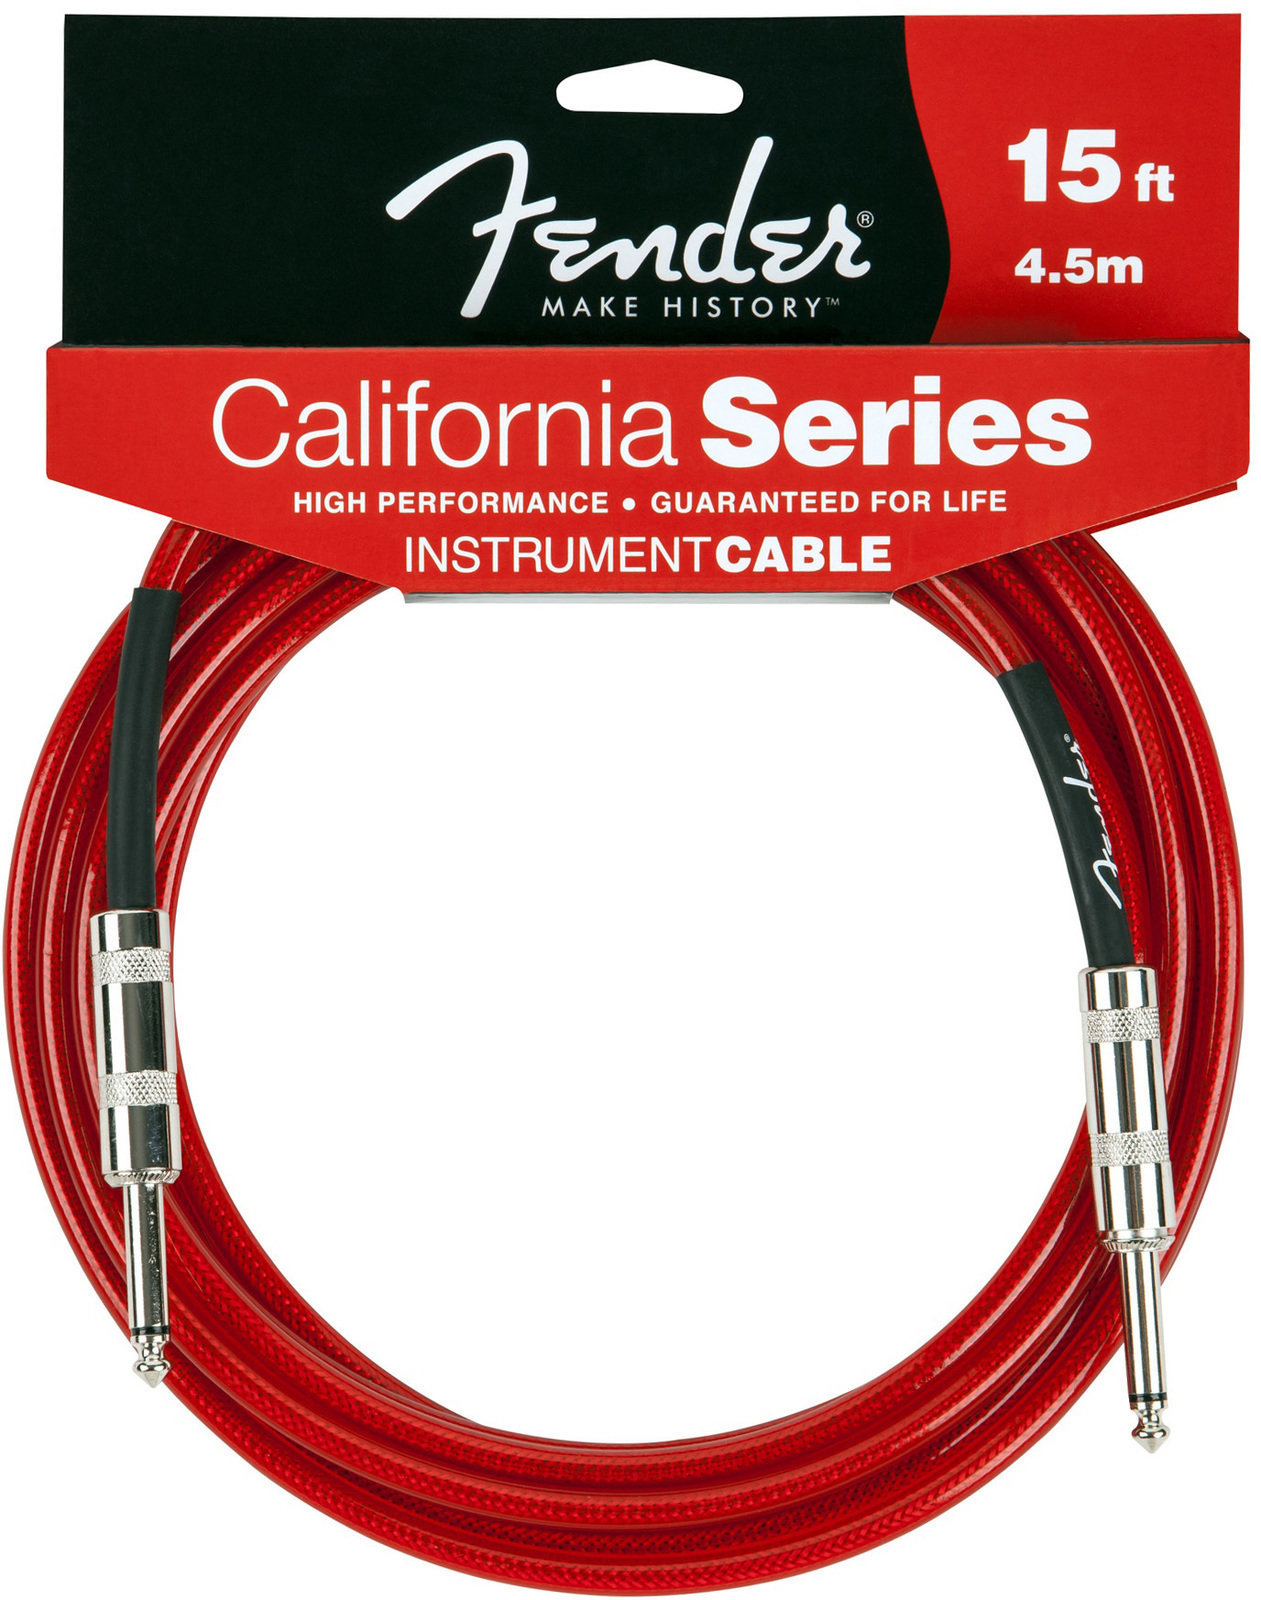 Kabel za instrumente Fender California Instrument Cable 4,5m - Candy Apple Red